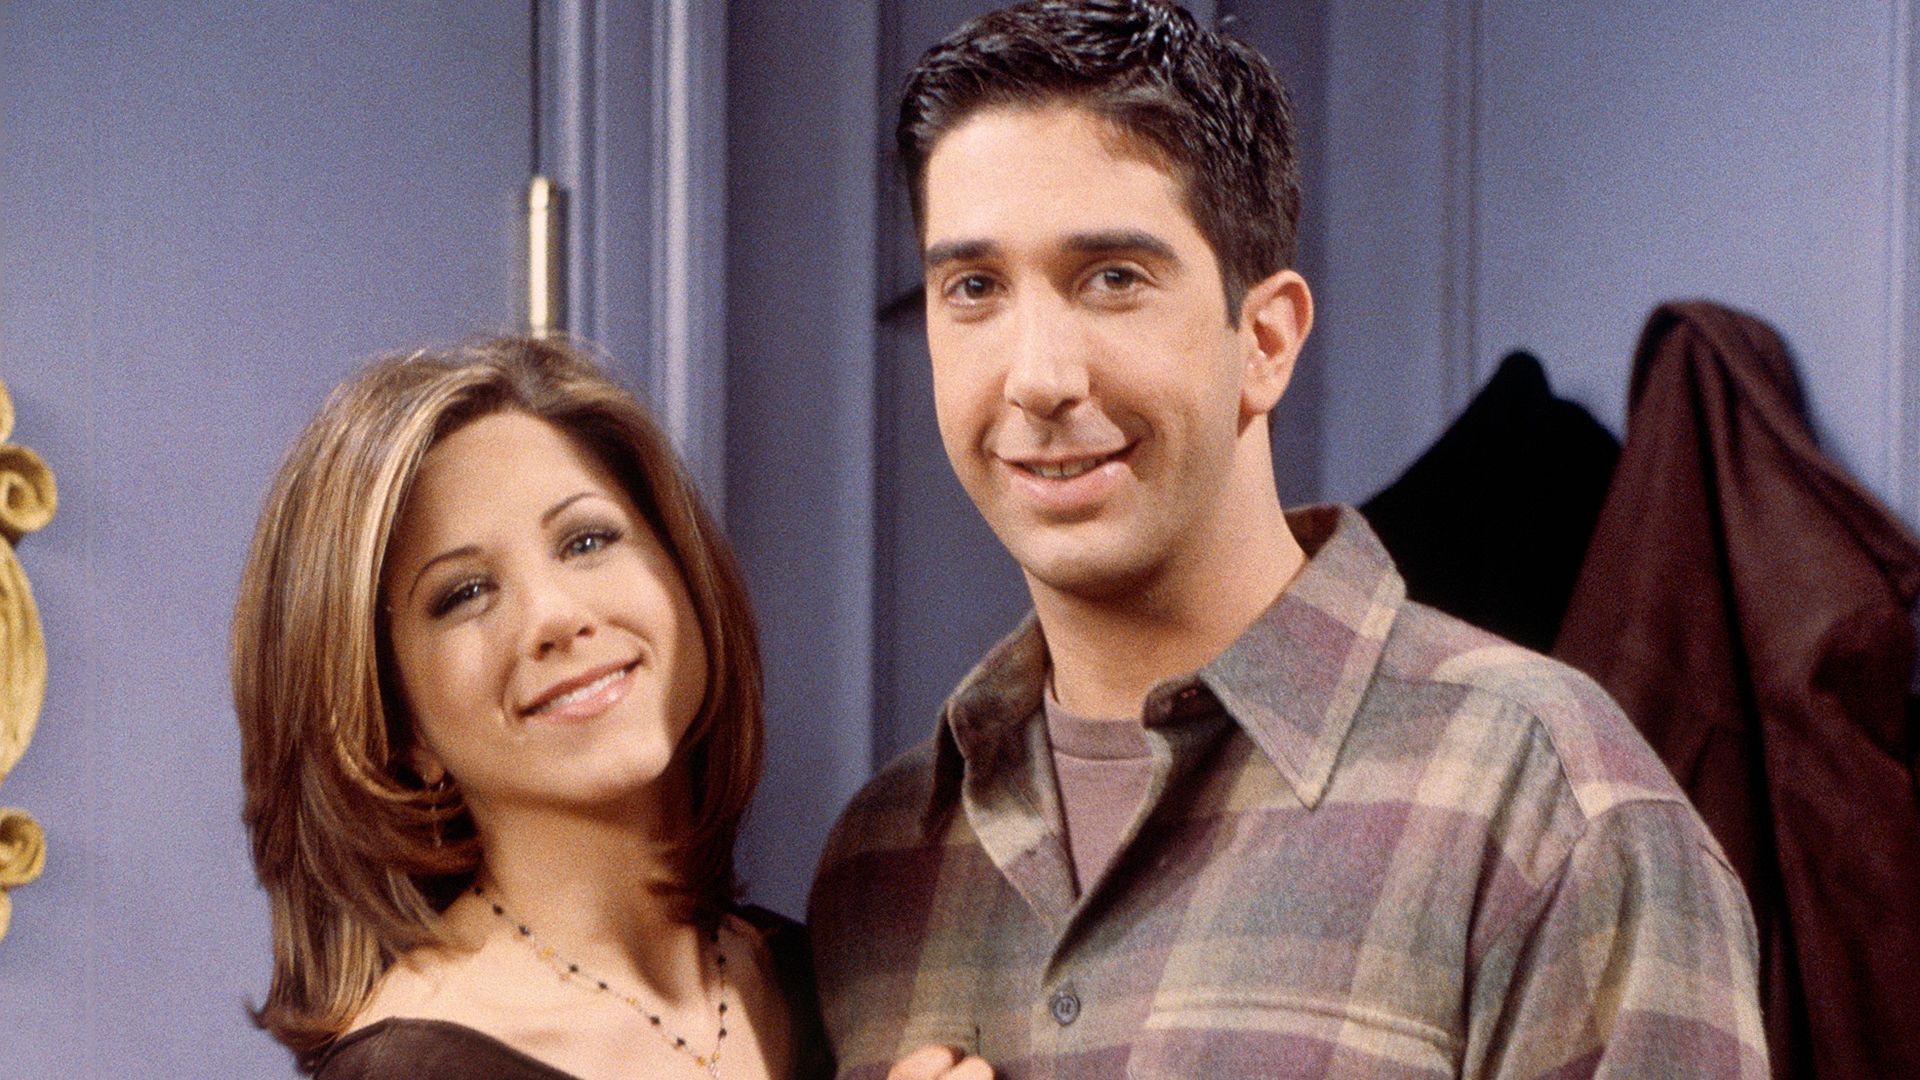 Jennifer Aniston and David Schwimmer have awkward reunion in epic new video